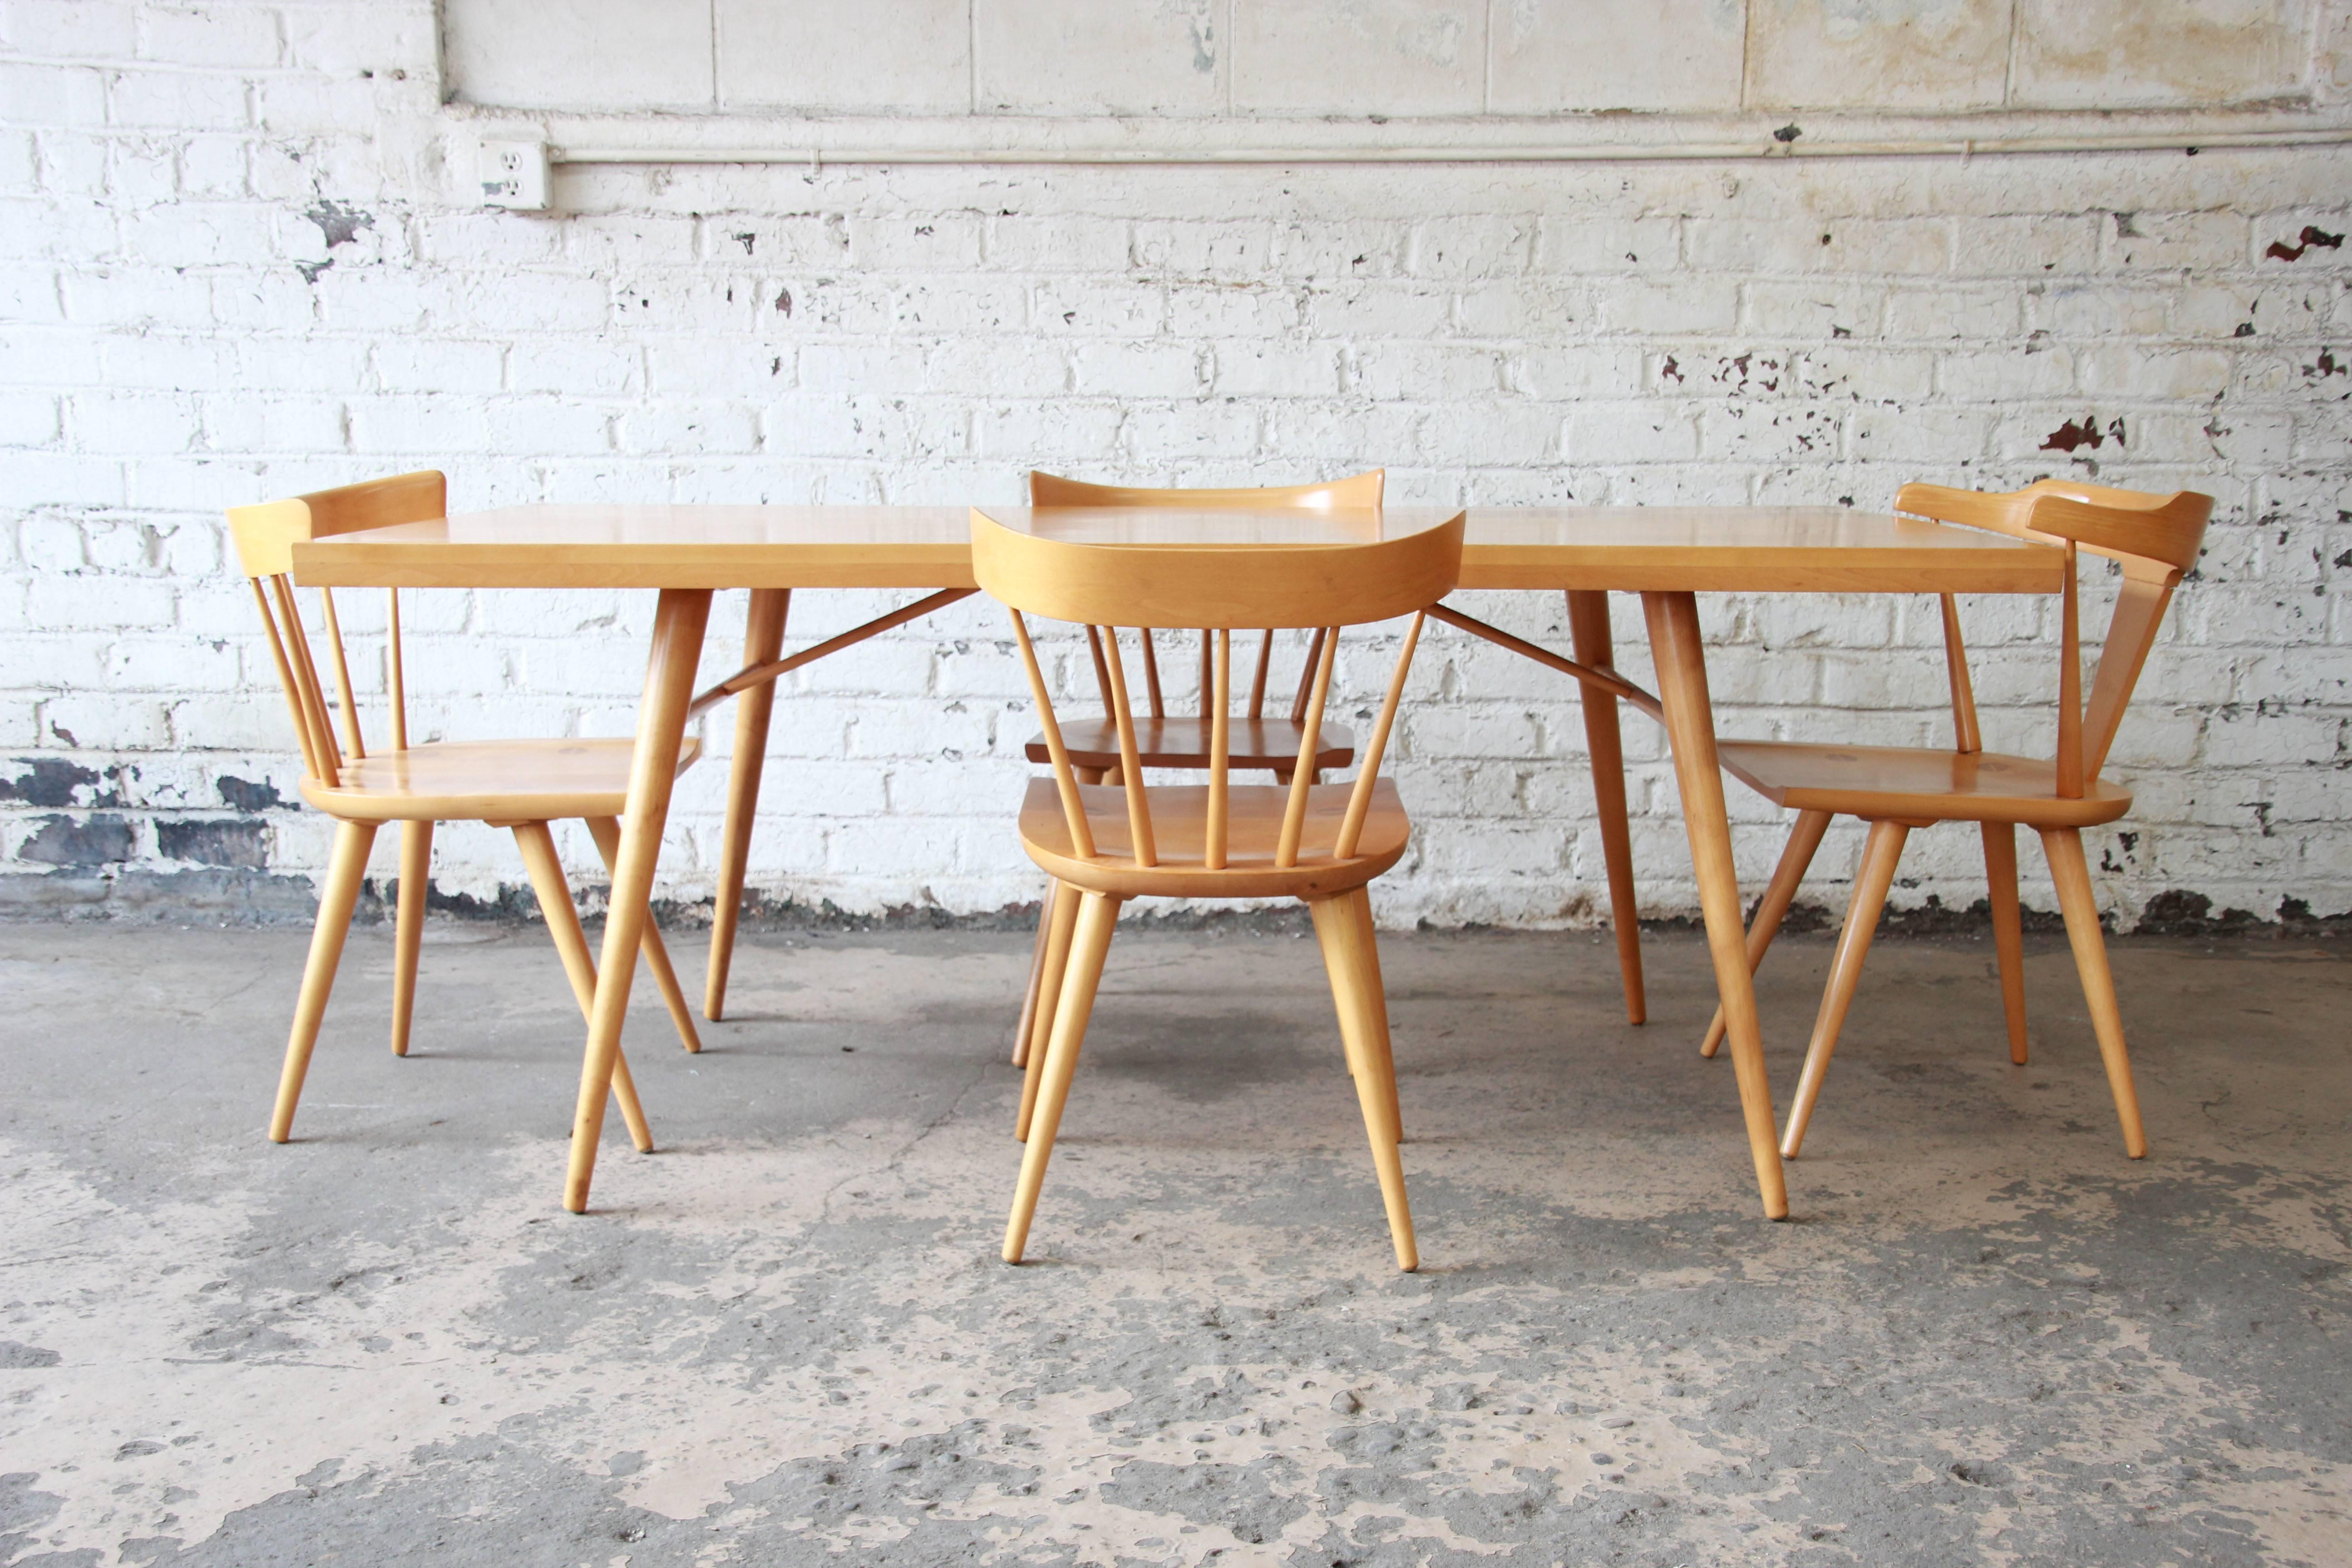 Offering a rare and exceptional Mid-Century Modern dining set designed by Paul McCobb for Winchendon Furniture. This original 1950s set includes the dining table and four chairs. There are three spindle back chairs and one T-back chair that serves